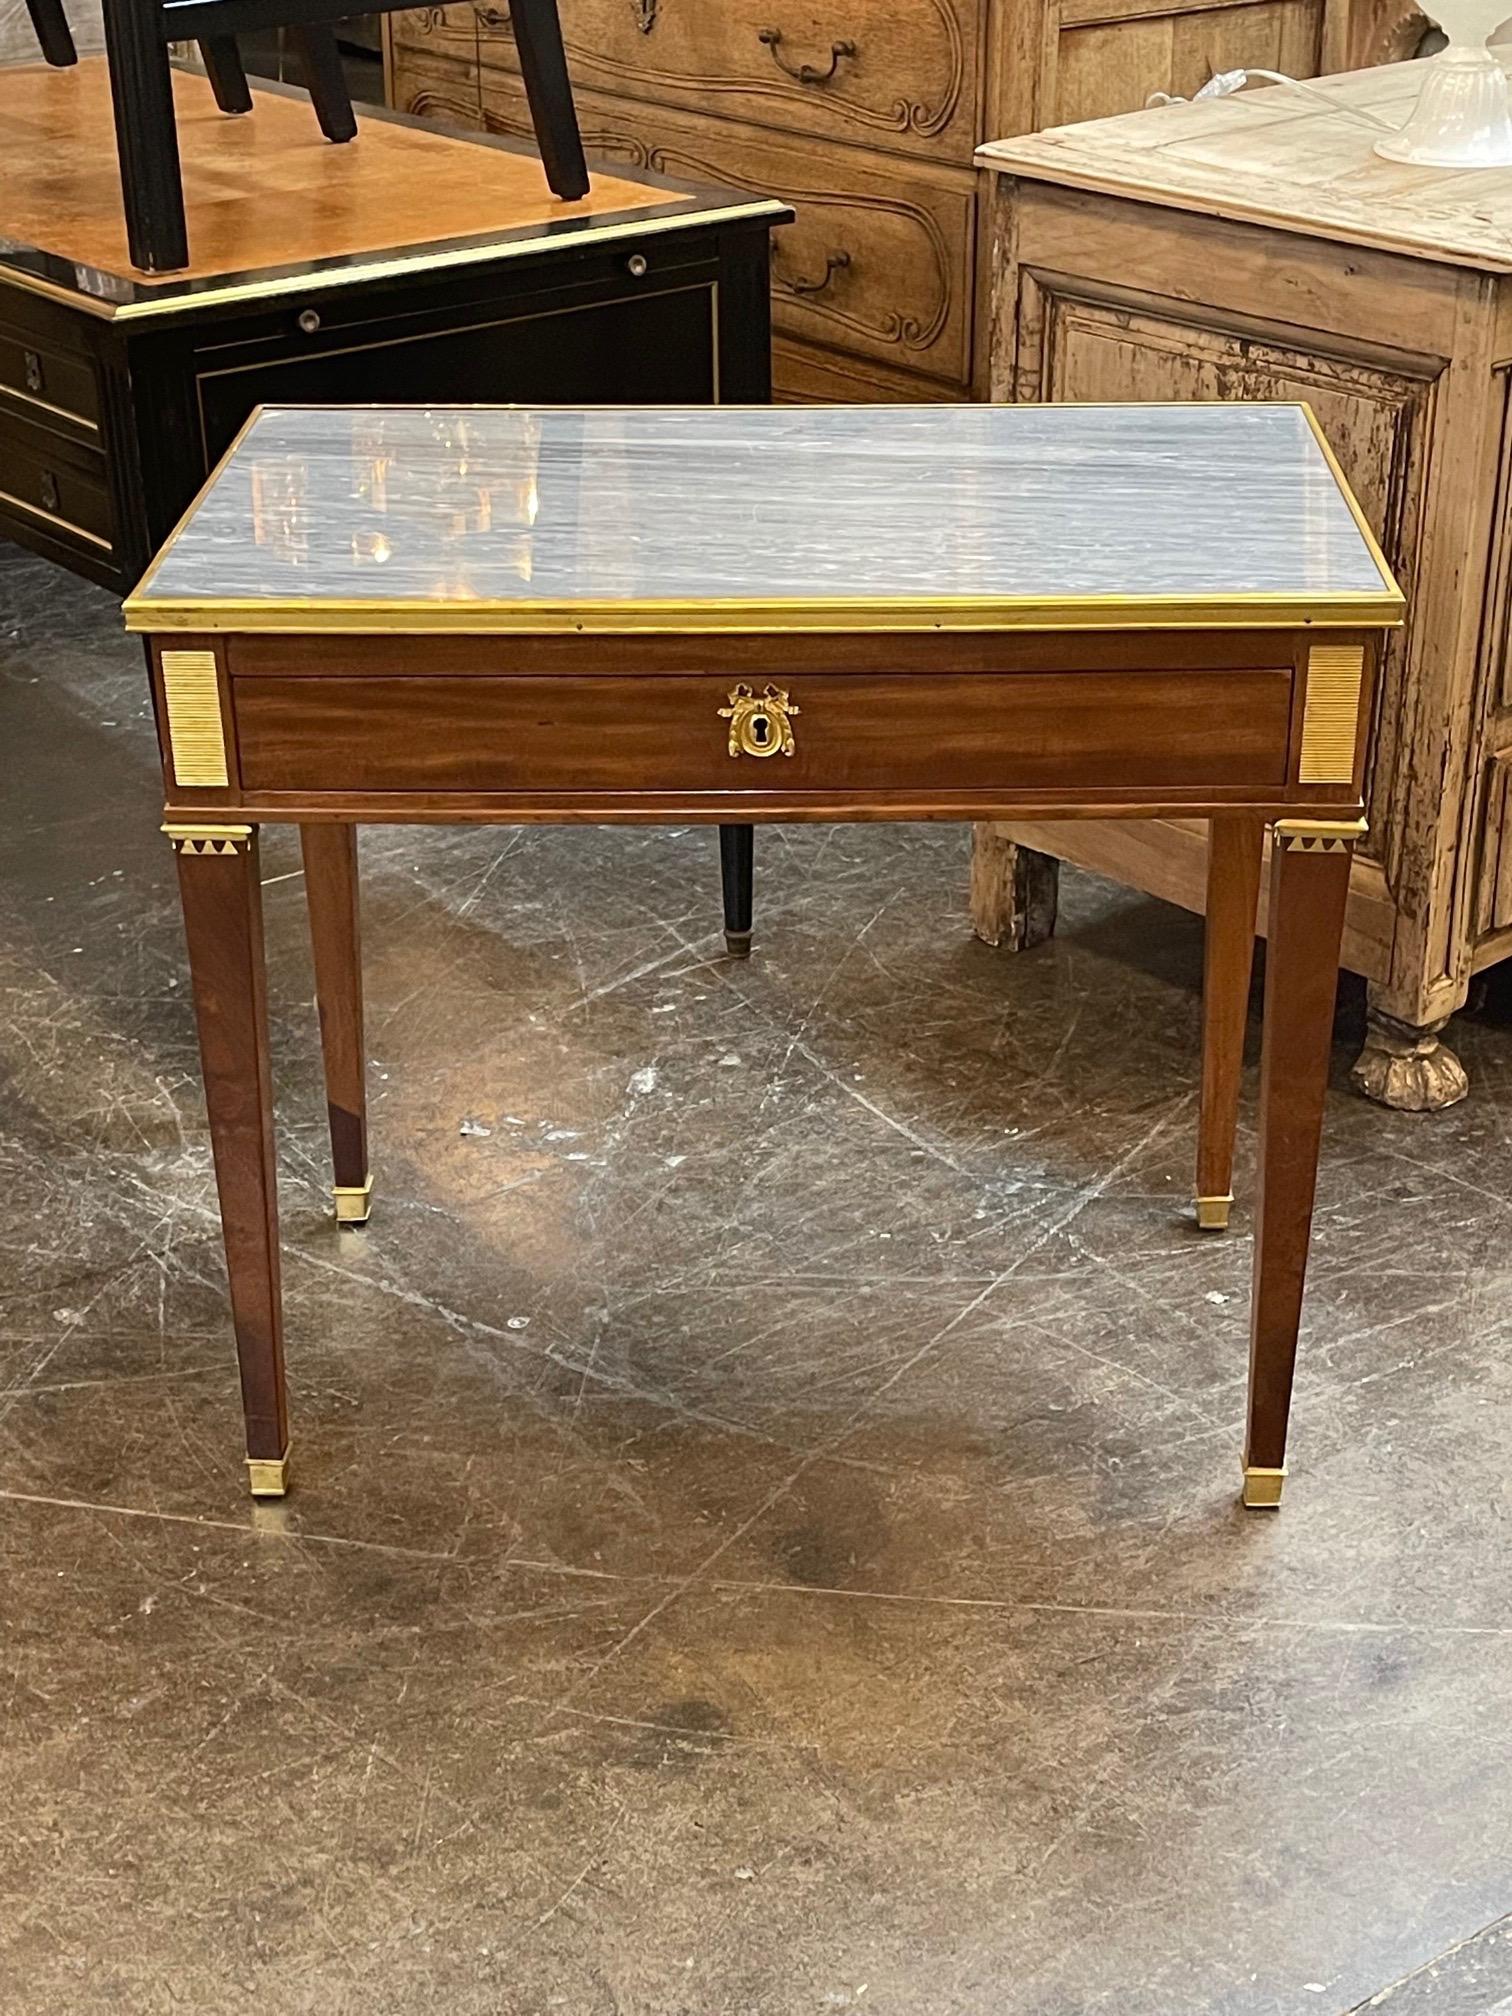 Elegant 19th century French Louis XVI Mahogany and brass side table. Very pretty finished polished wood and inlaid gray colored marble.